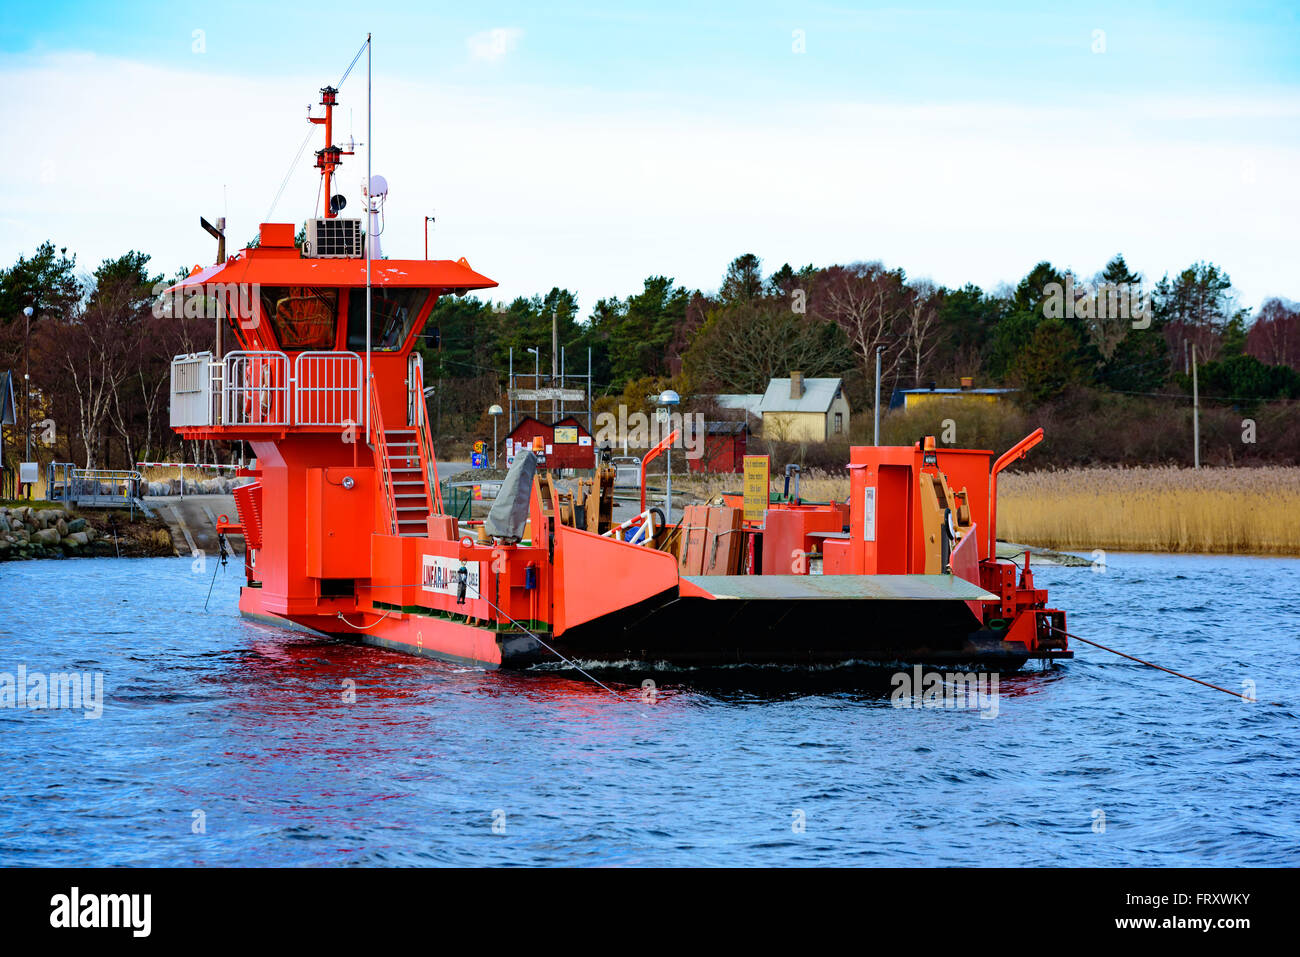 Torhamn, Sweden - March 18, 2016: The bright orange cable operated car ferry between mainland and the Ytteron island. Here seen Stock Photo